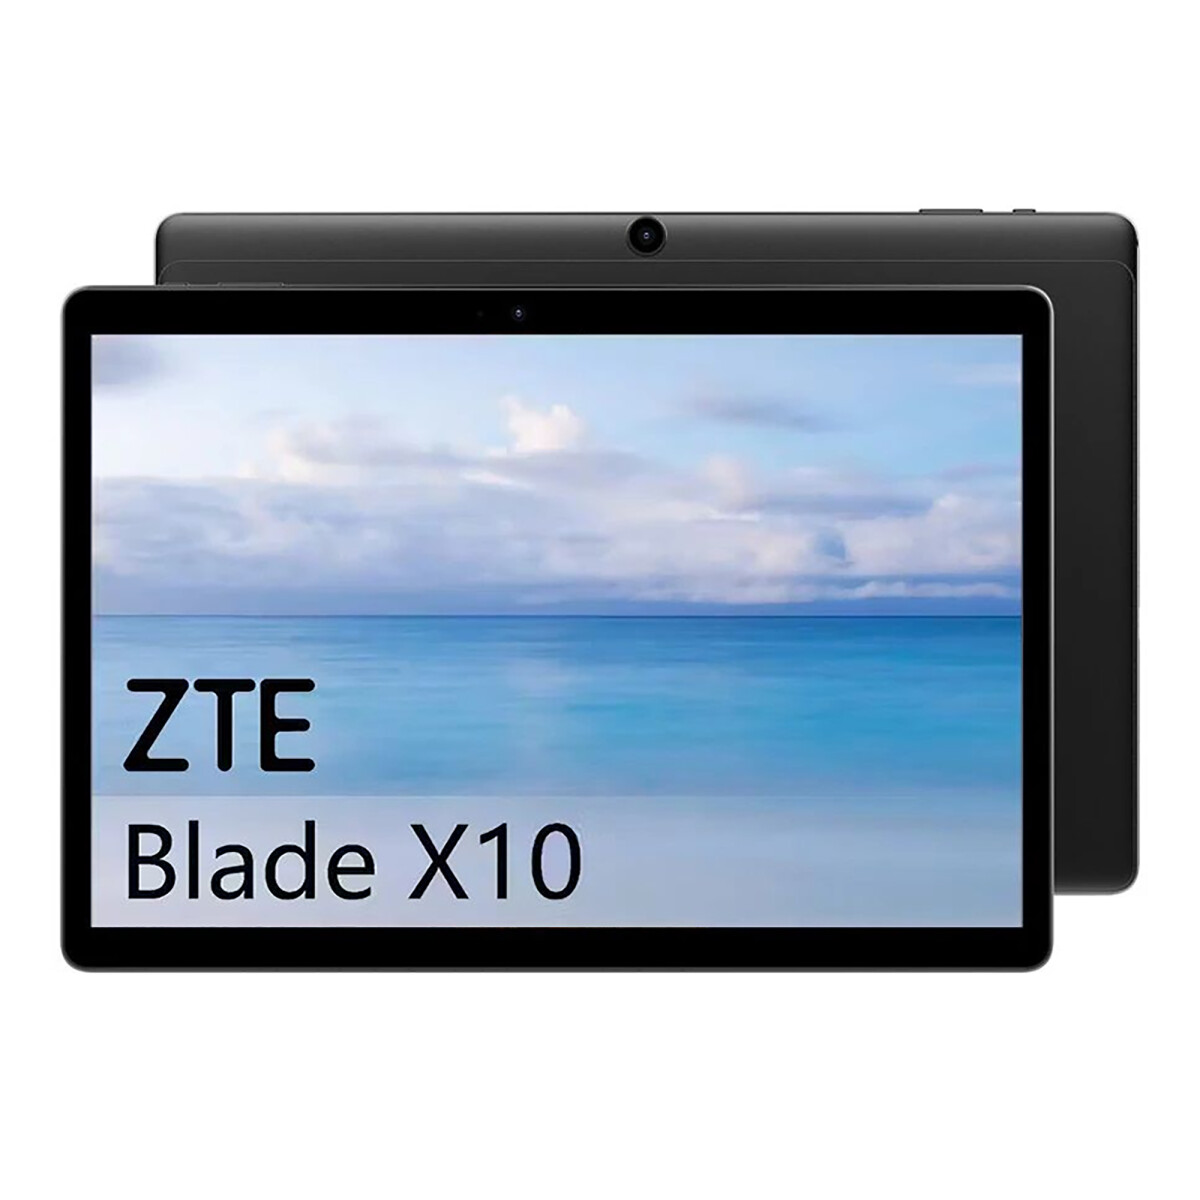 Zte - Tablet Blade X10 - 10,1'' Multitáctil Ips. 4G. 8 Core. Android 12. Ram 3GB / Rom 32GB. 8MP+5MP - 001 